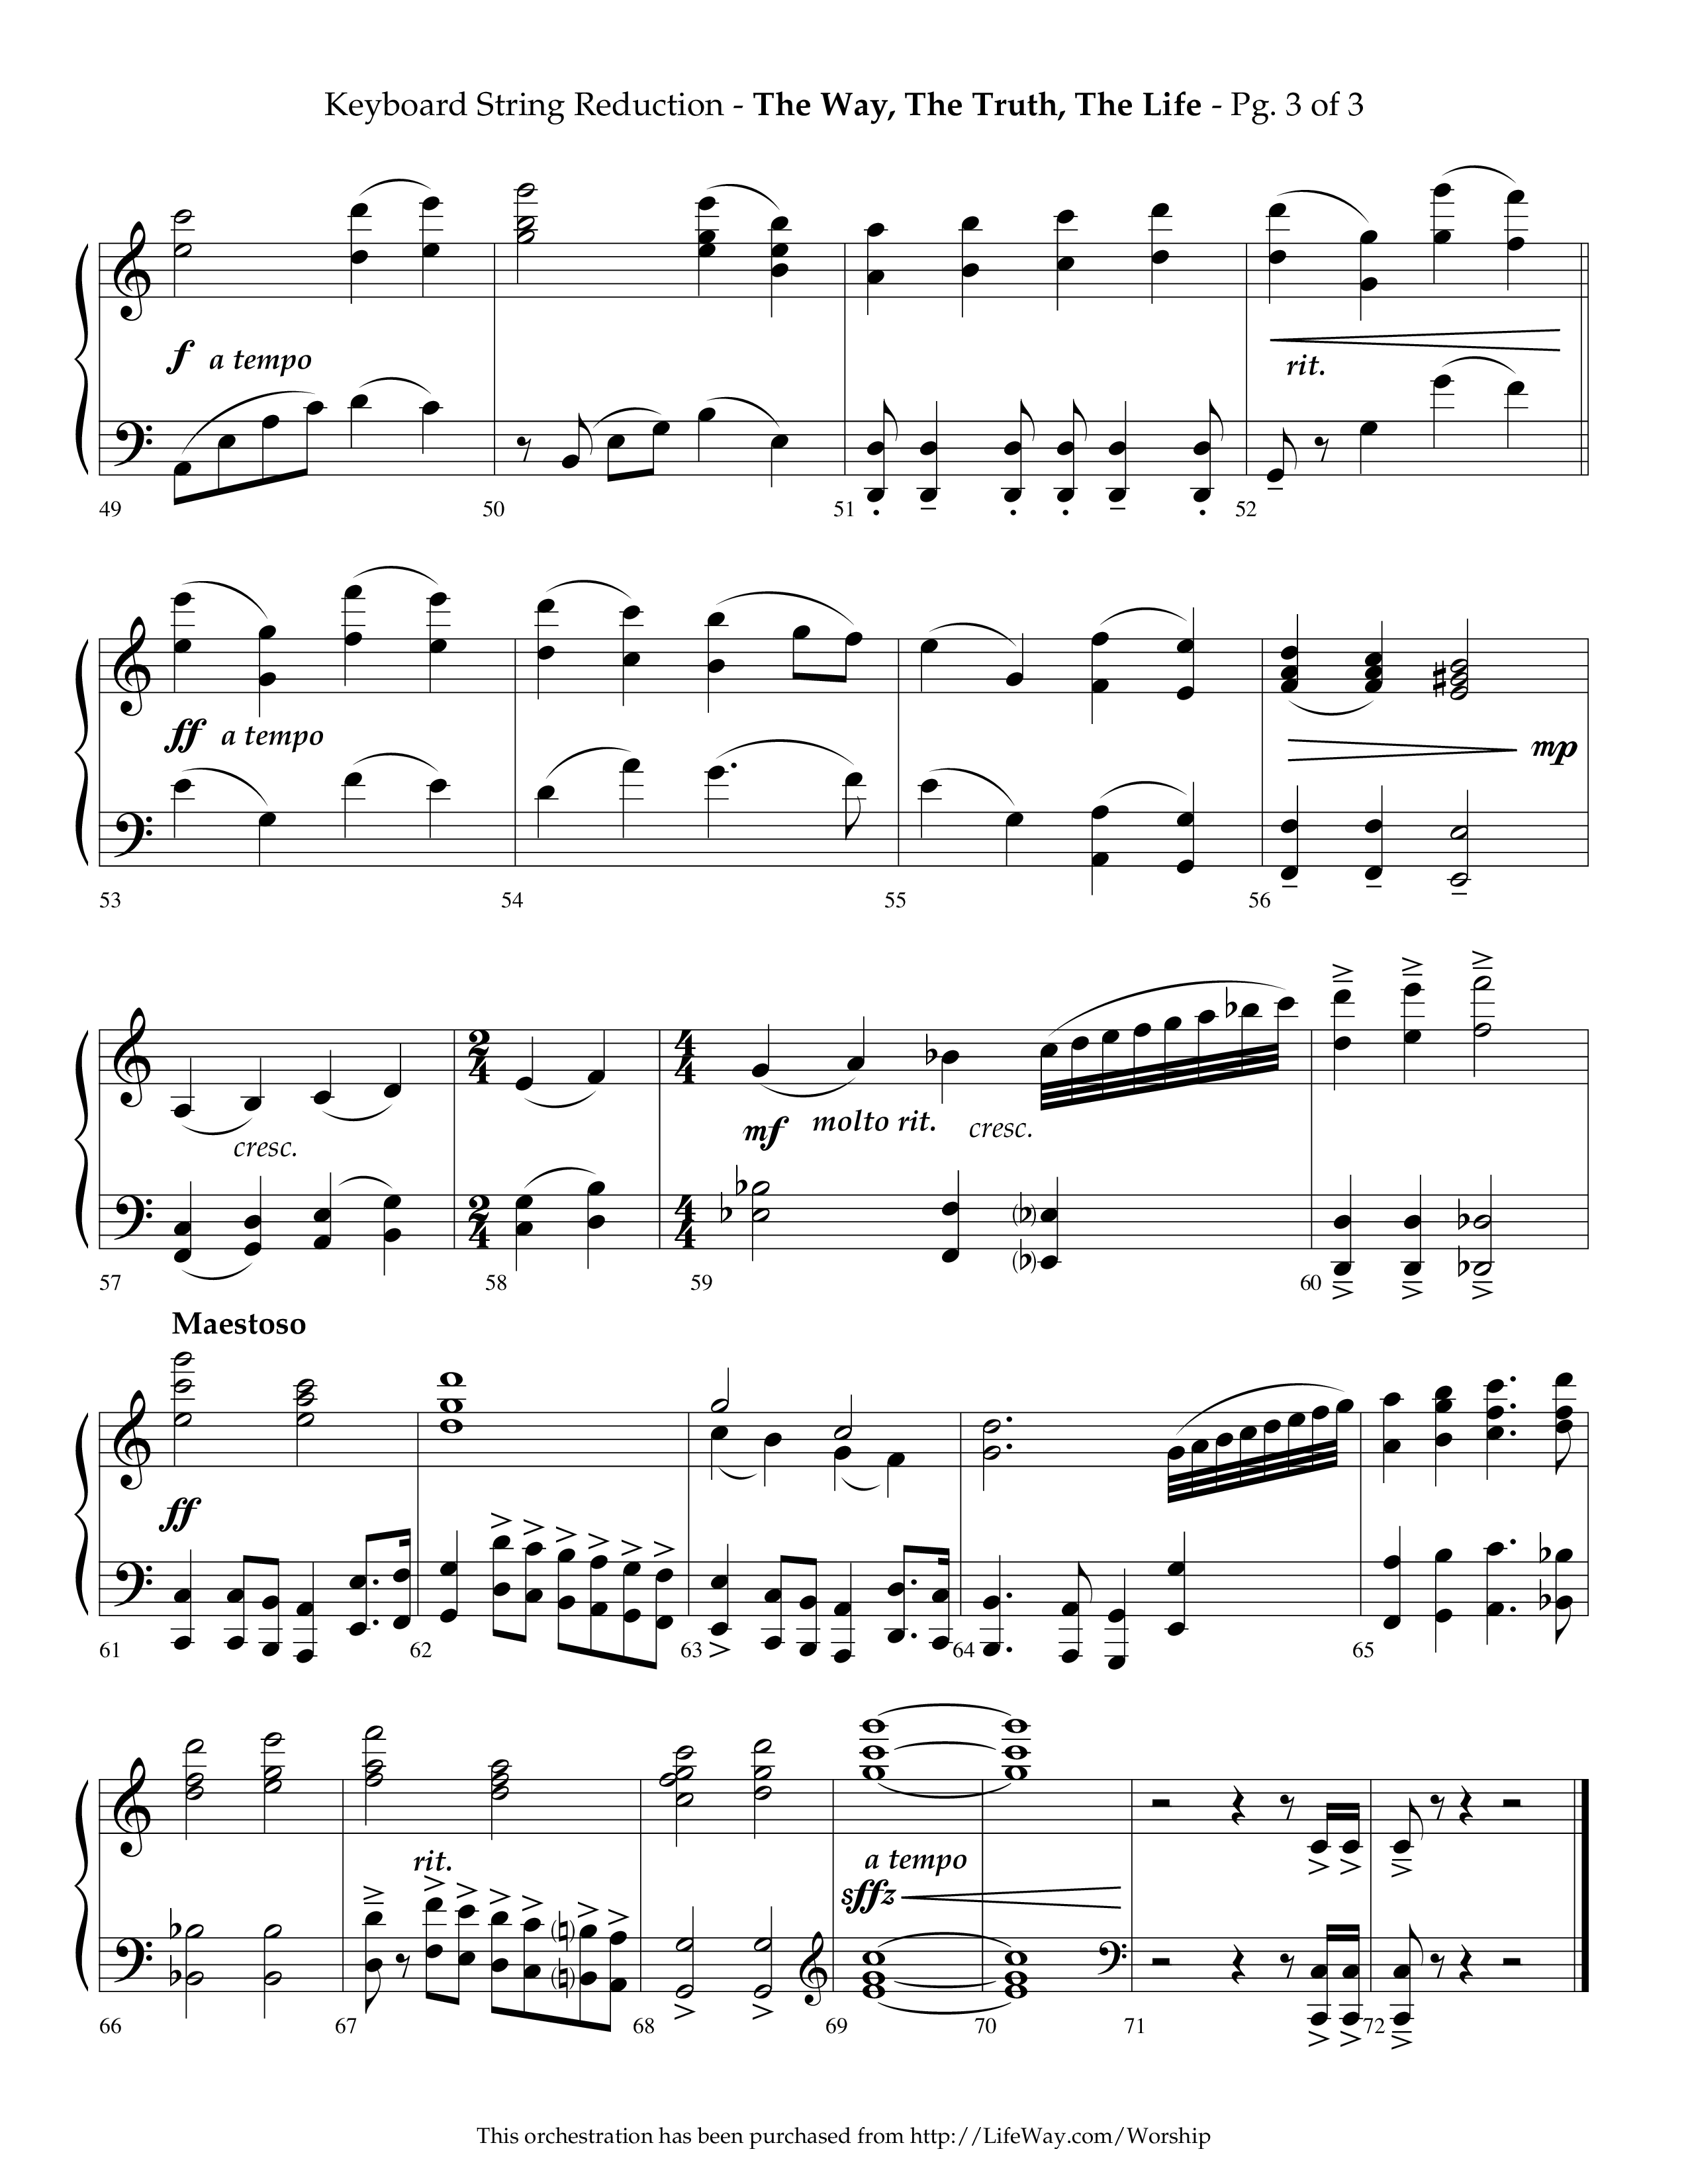 The Way The Truth The Life (Choral Anthem SATB) String Reduction (Lifeway Choral / Arr. Phillip Keveren)